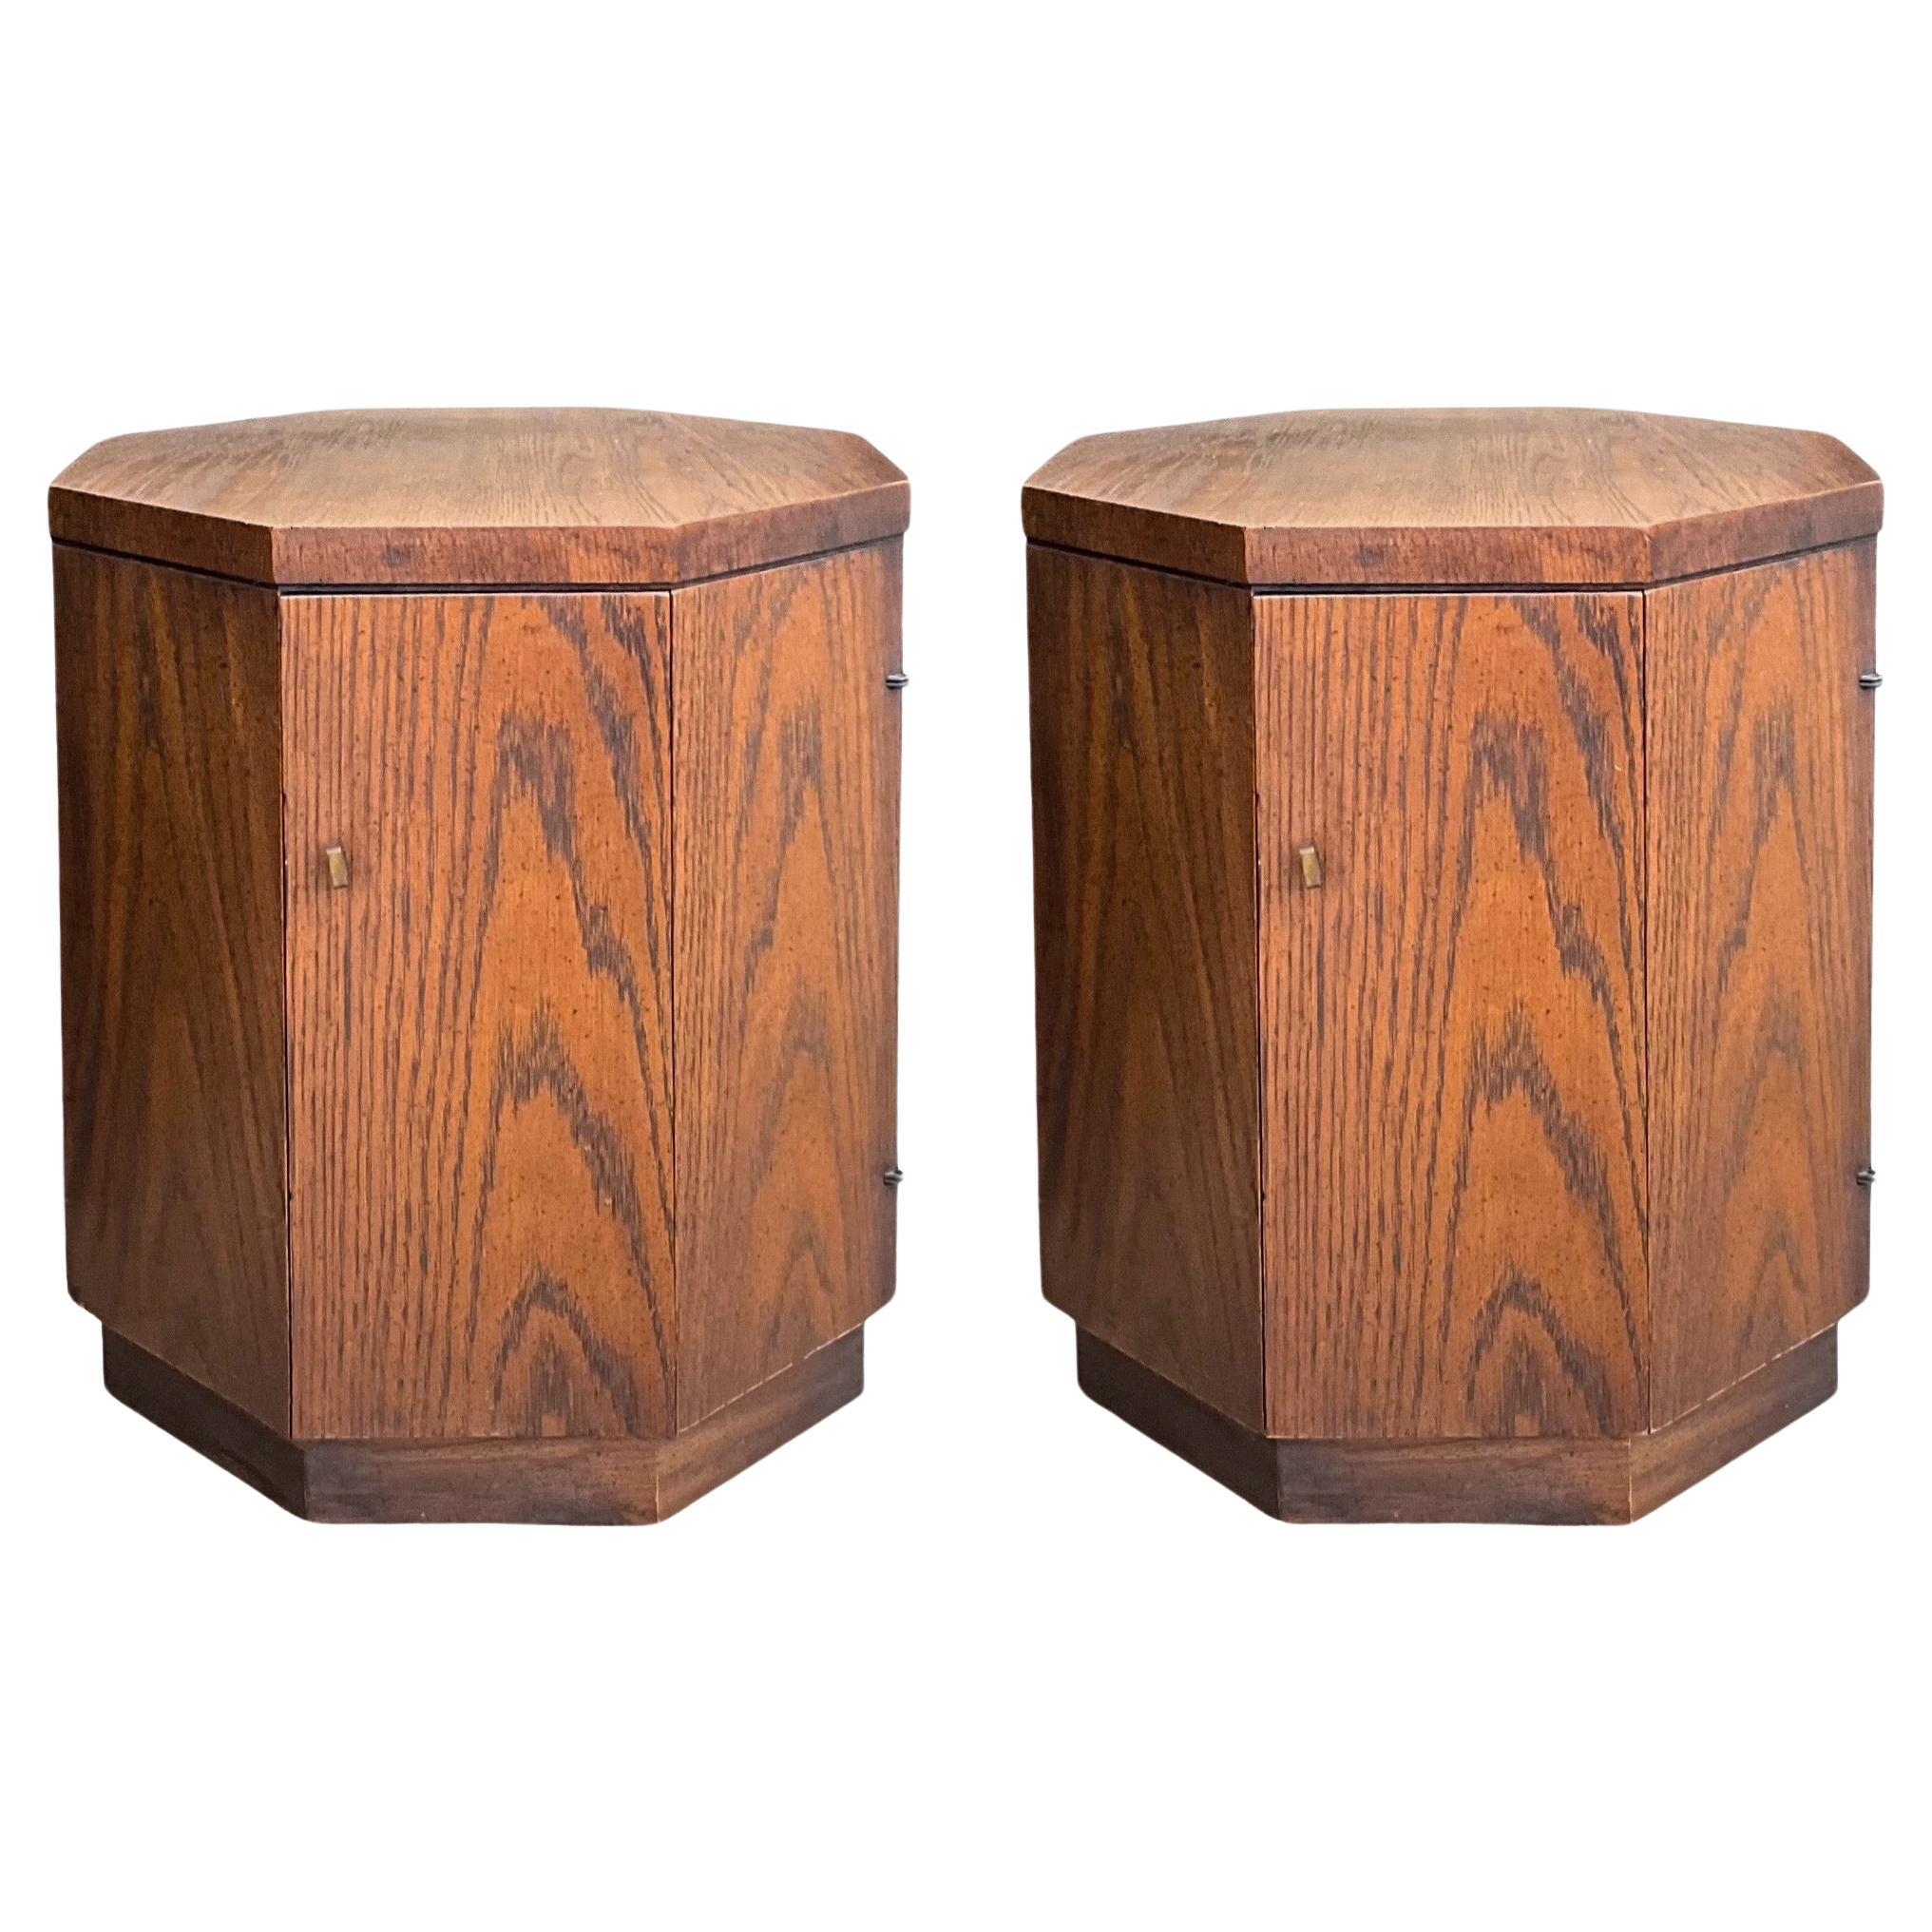 Mid-Century Modern Fruitwood Side Cylinder Tables With Storage Att. To Drexel